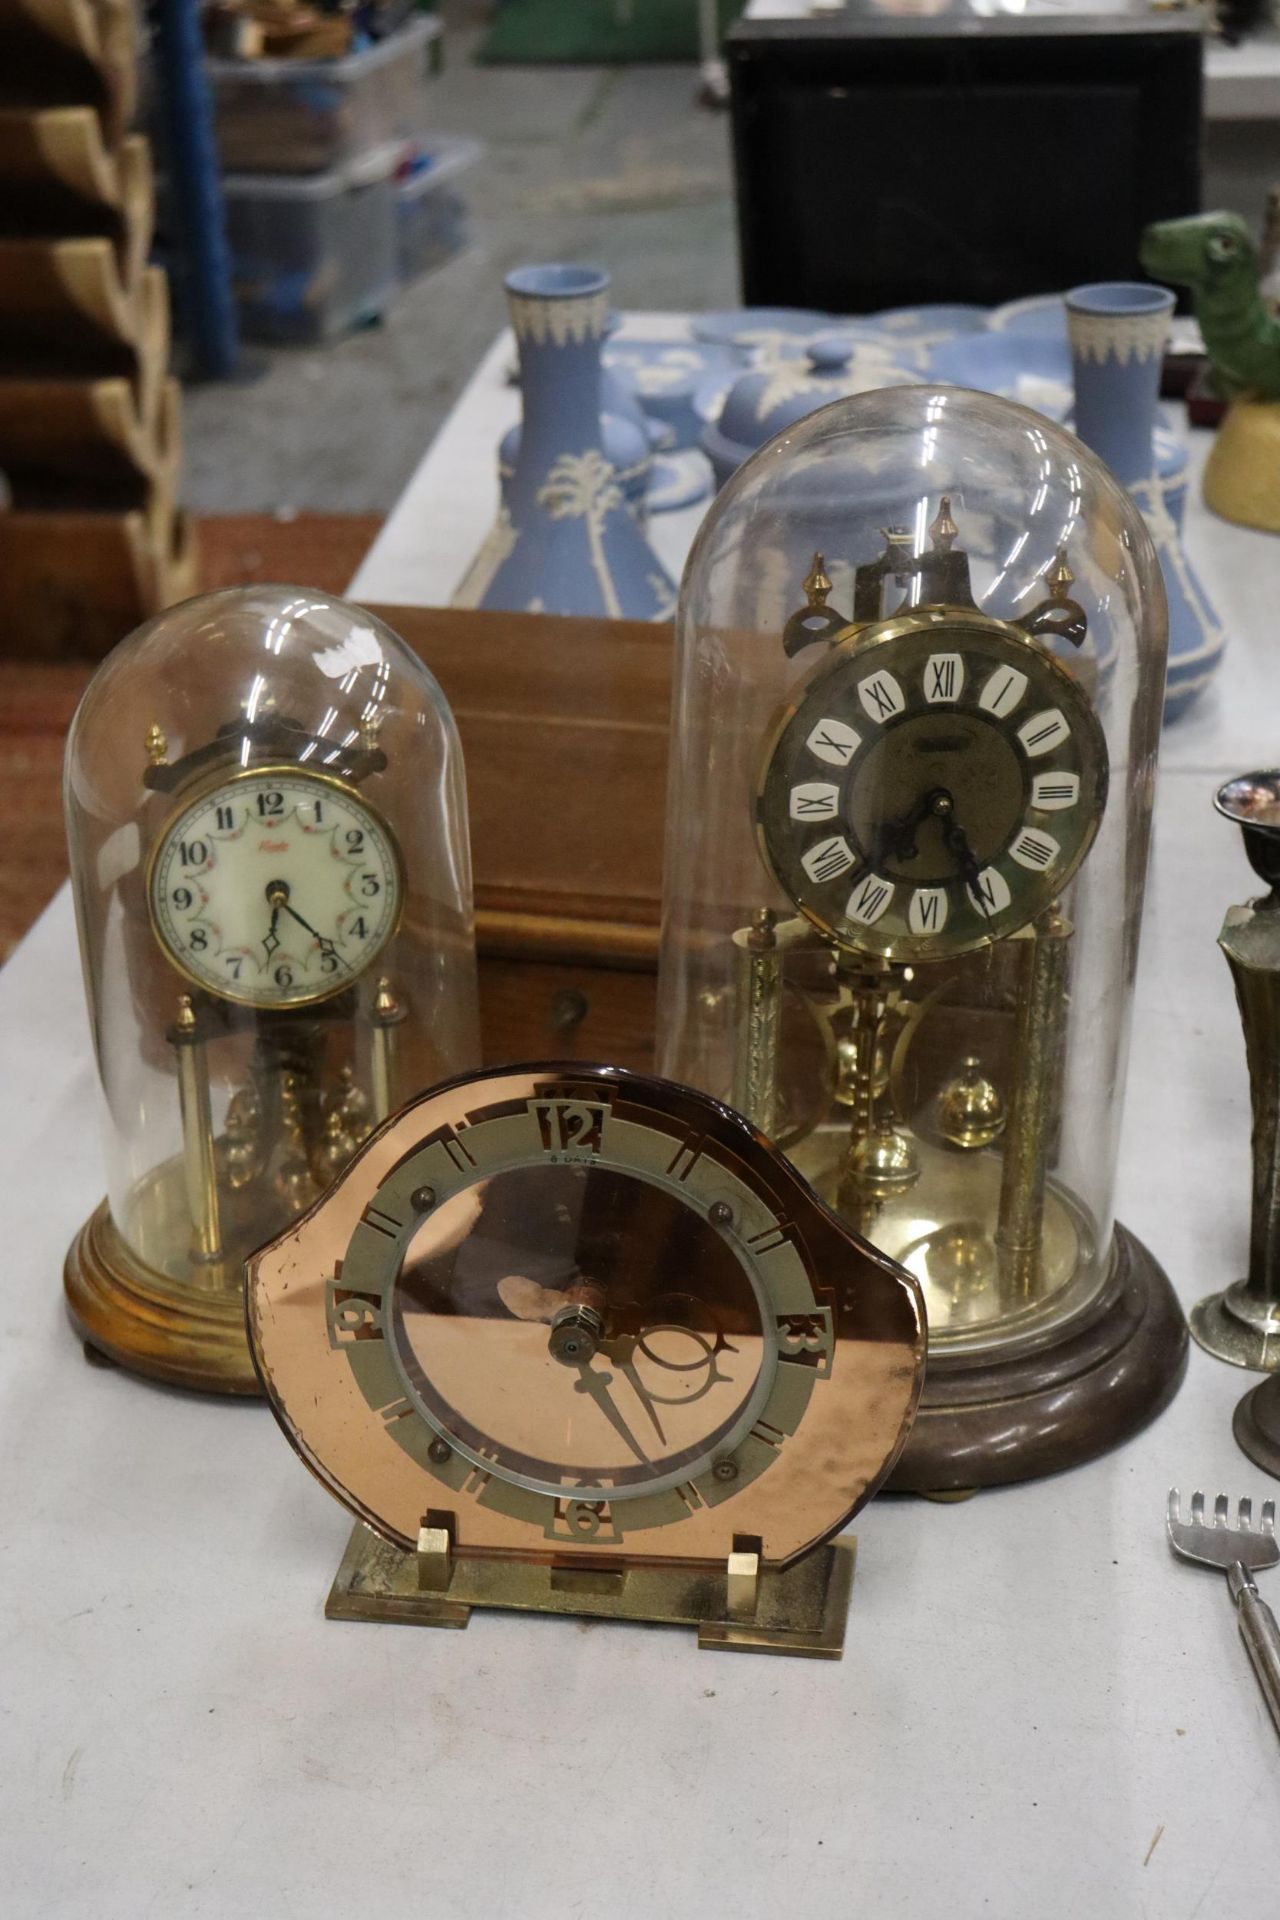 TWO VINTAGE ANNIVERSARY CLOCKS IN DOMES PLUS A MANTLE CLOCK - Image 6 of 12